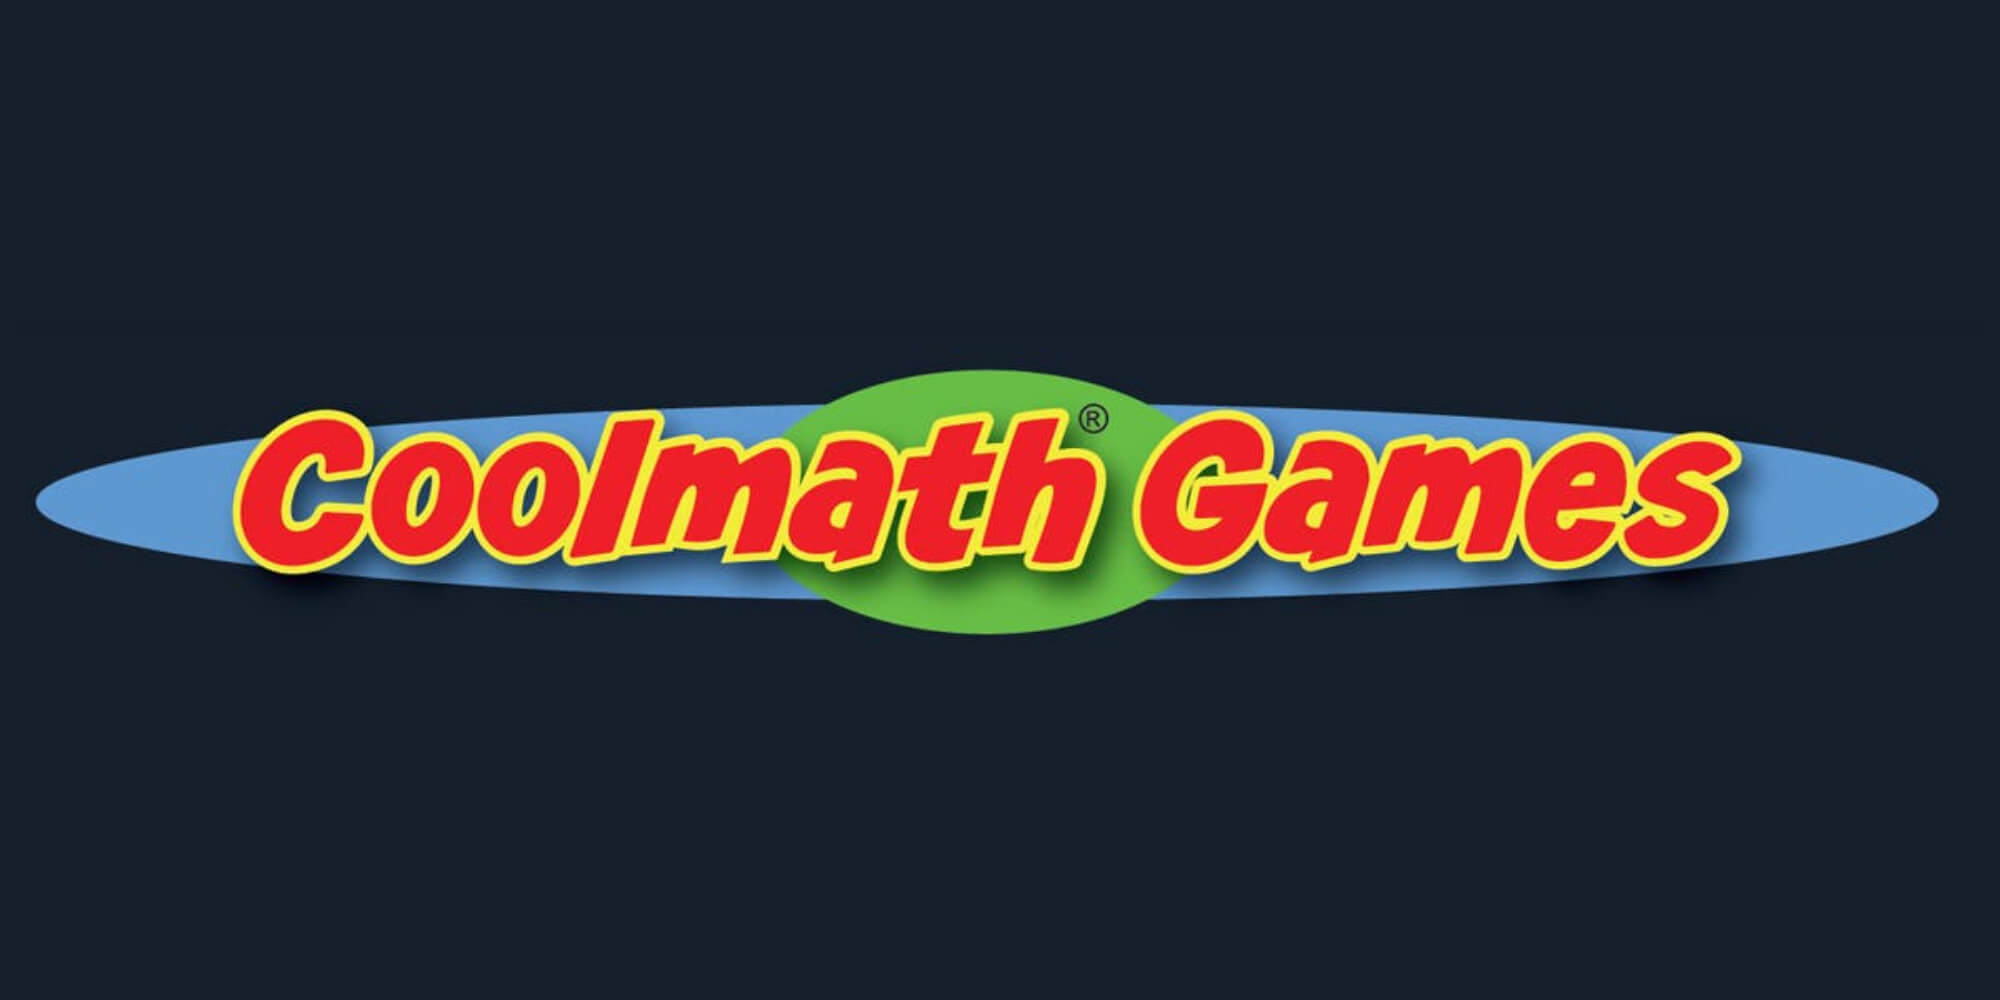 cooking games on cool math games